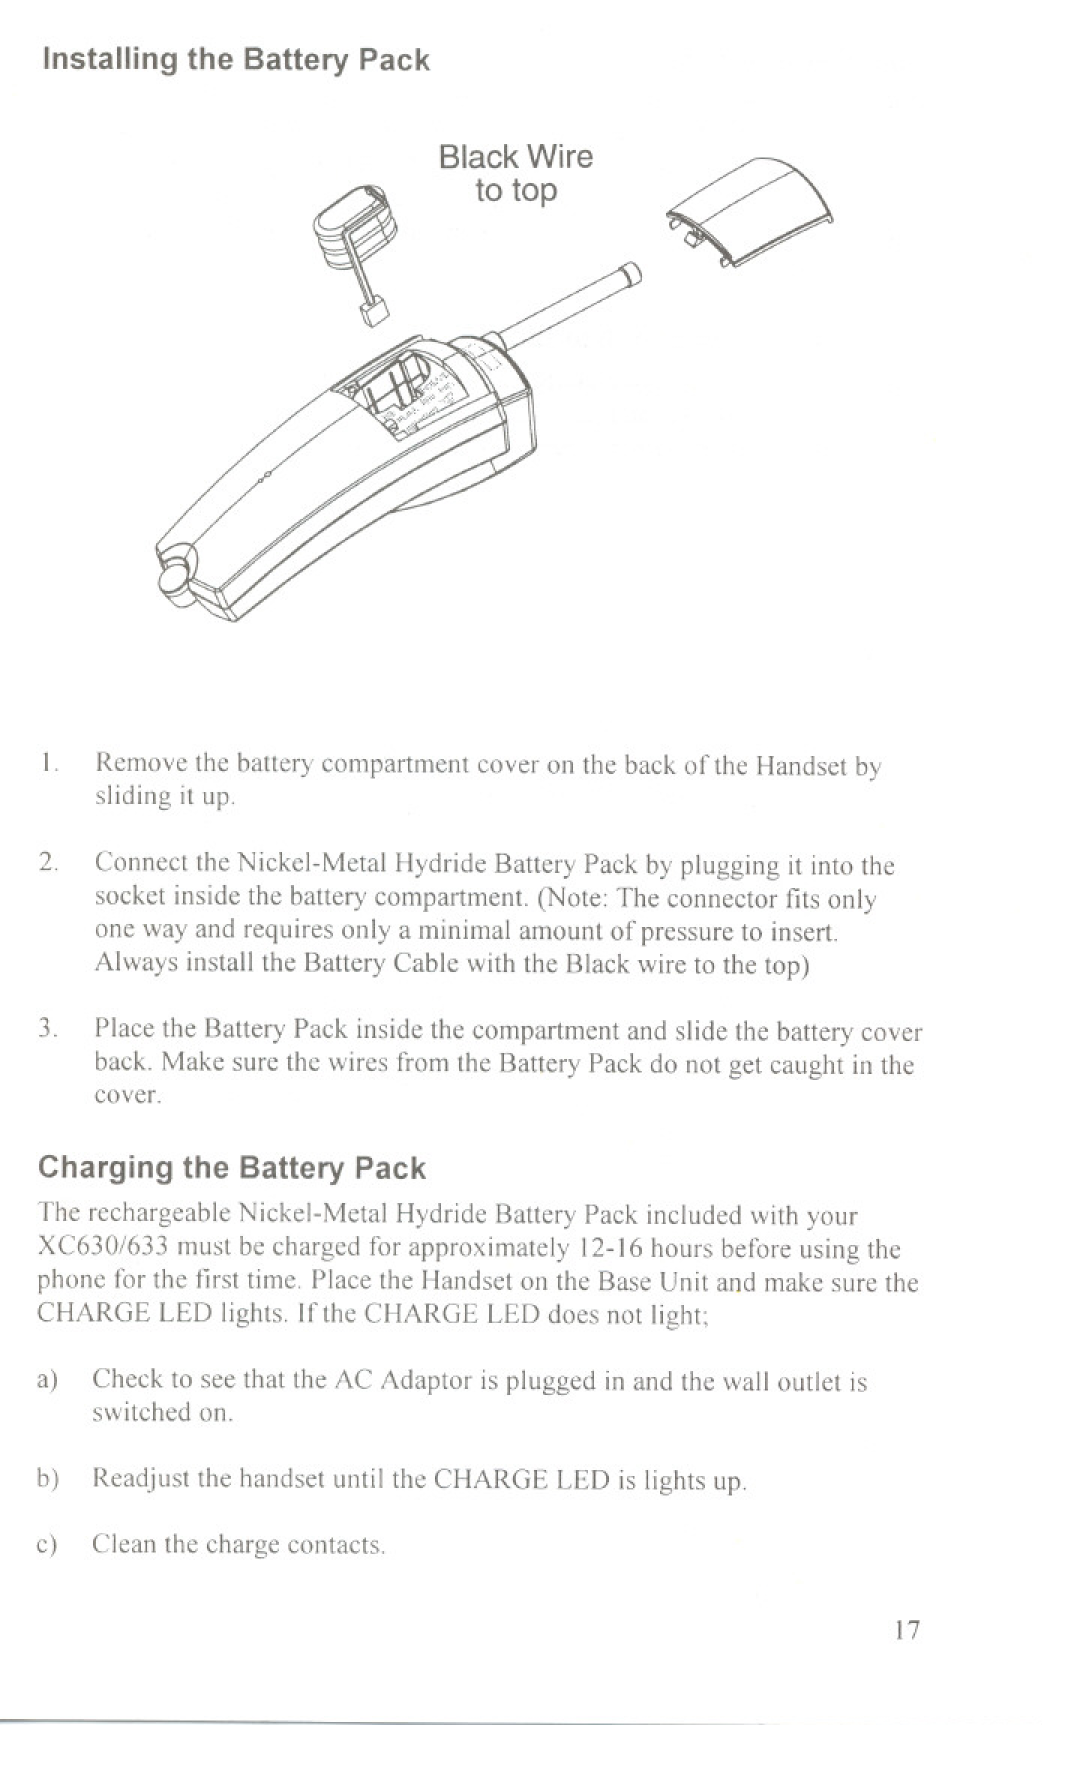 Uniden XC630, XC633 manual to top, Installing the Battery Pack, Black Wire, Charging the Battery Pack 